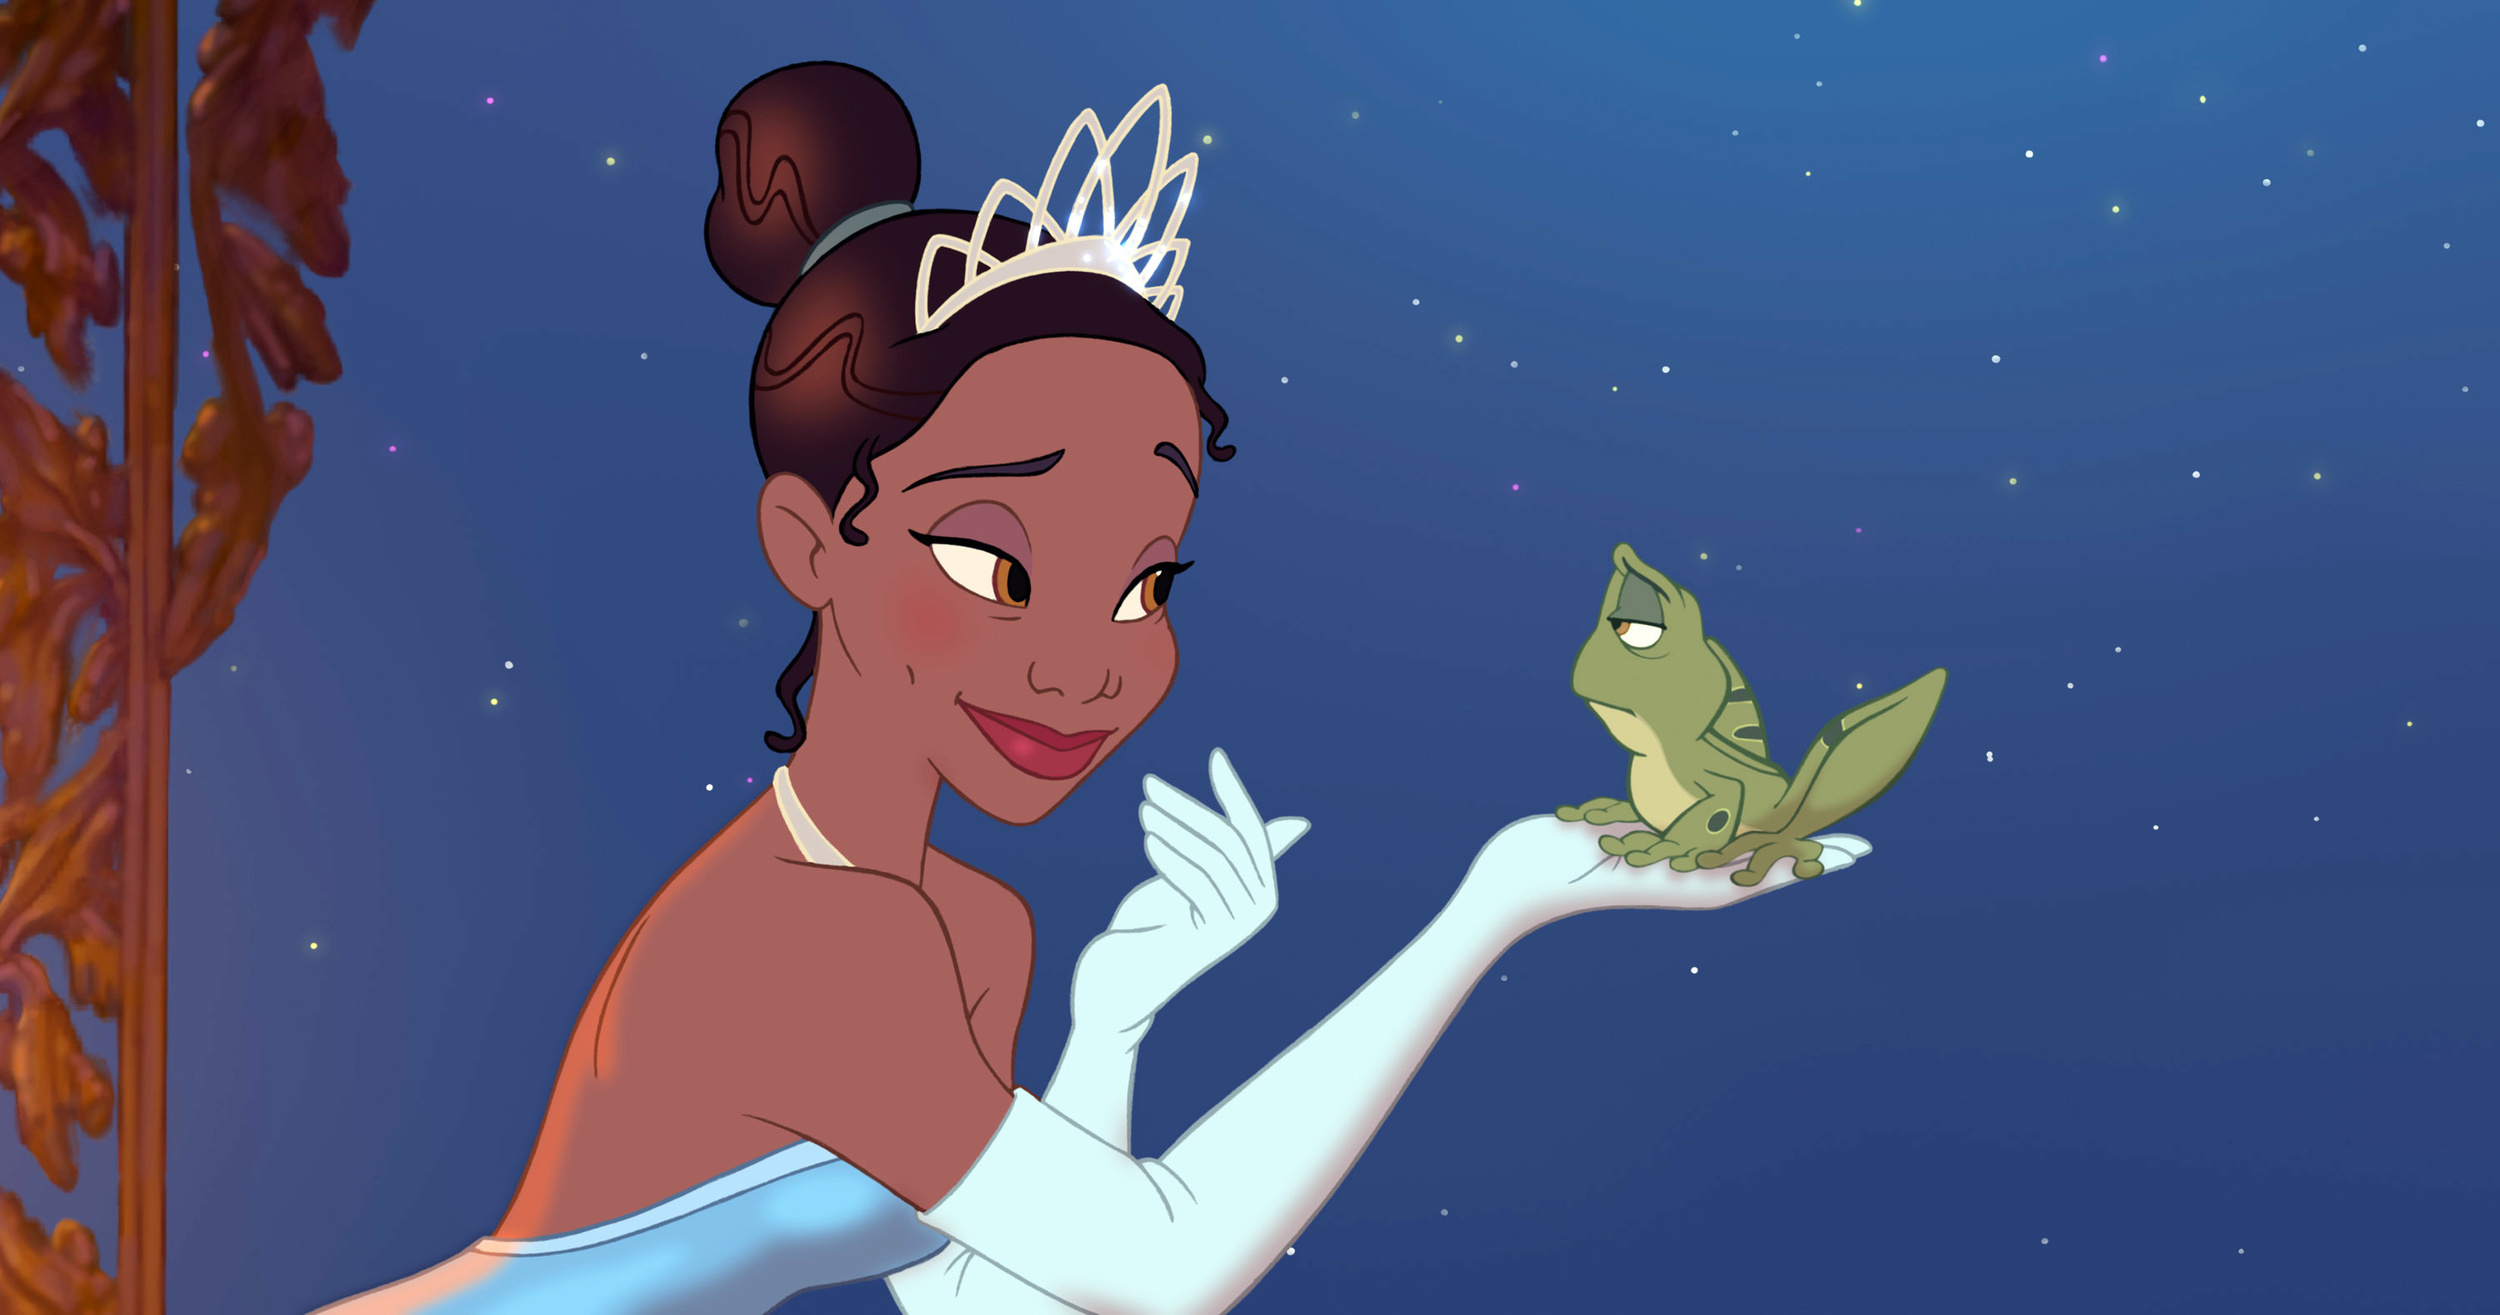 <p><span><em>The Princess and the Frog</em> was the first time Disney had a Black princess. It was also a throwback to their classic 2D animation style, and audiences adored it. Perhaps more 2D tales instead of those live-action remakes in the future?</span></p><p><a href='https://www.msn.com/en-us/community/channel/vid-cj9pqbr0vn9in2b6ddcd8sfgpfq6x6utp44fssrv6mc2gtybw0us'>Follow us on MSN to see more of our exclusive entertainment content.</a></p>